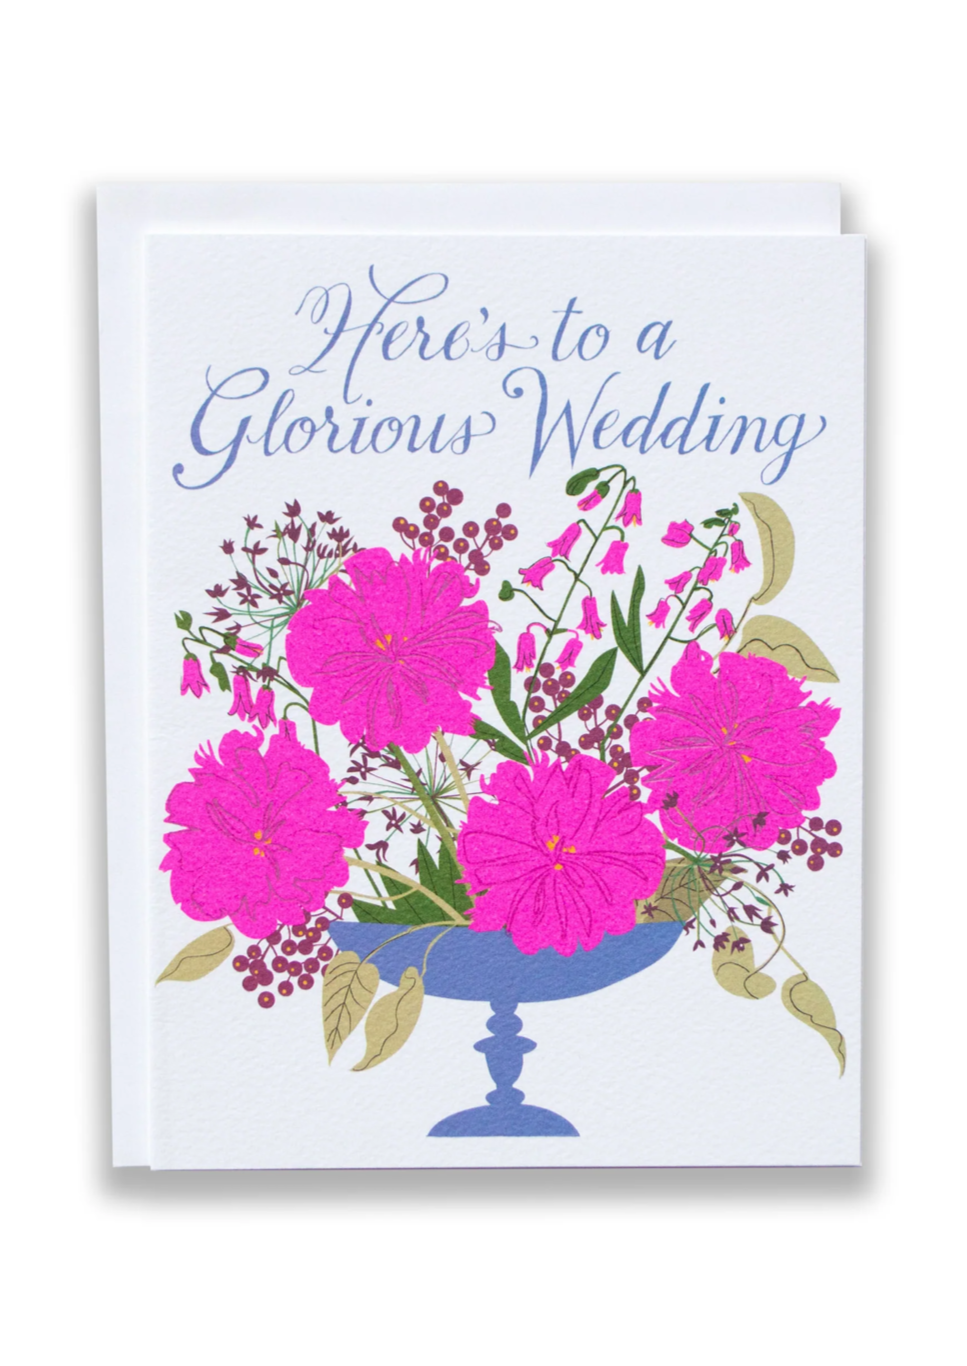 Glorious Wedding Note Card